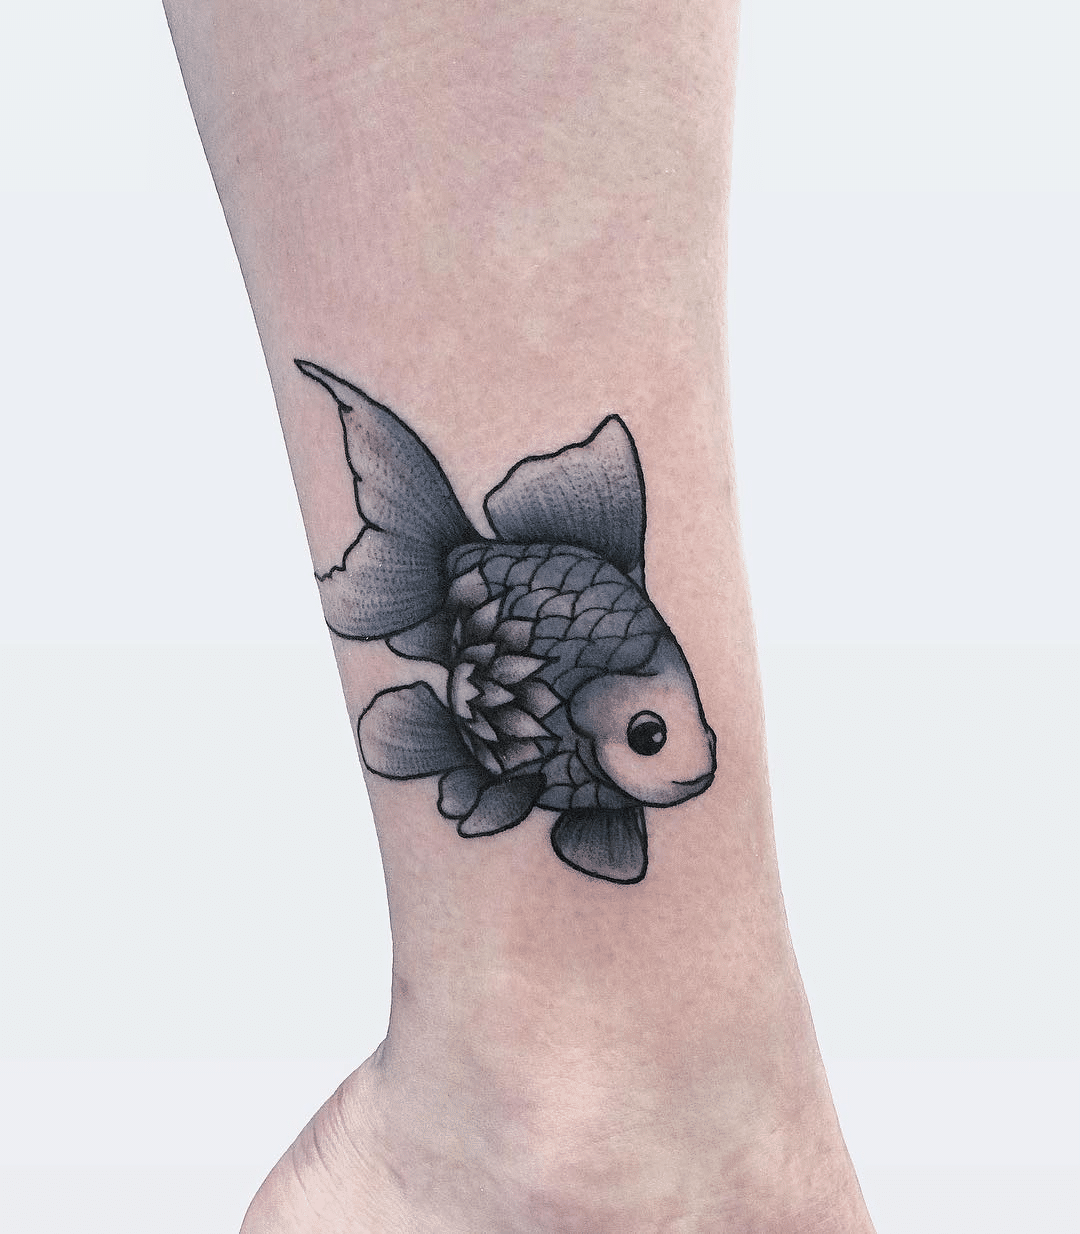 Goldfish on the Ankle